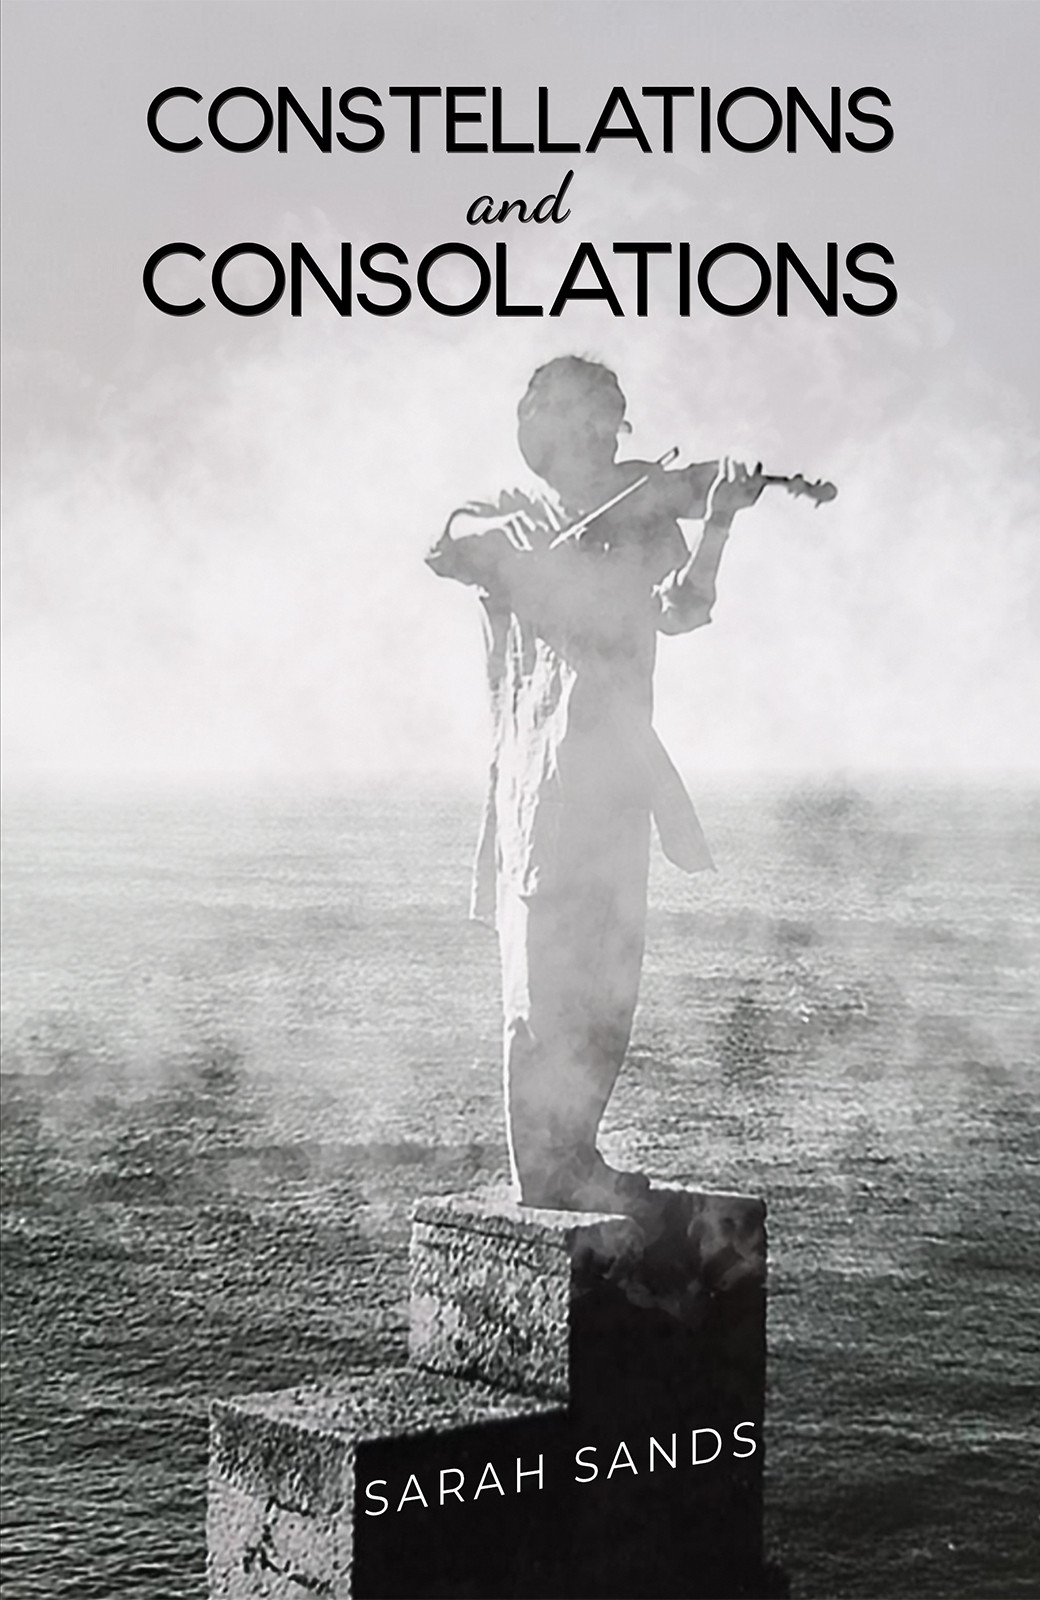 Constellations and Consolations